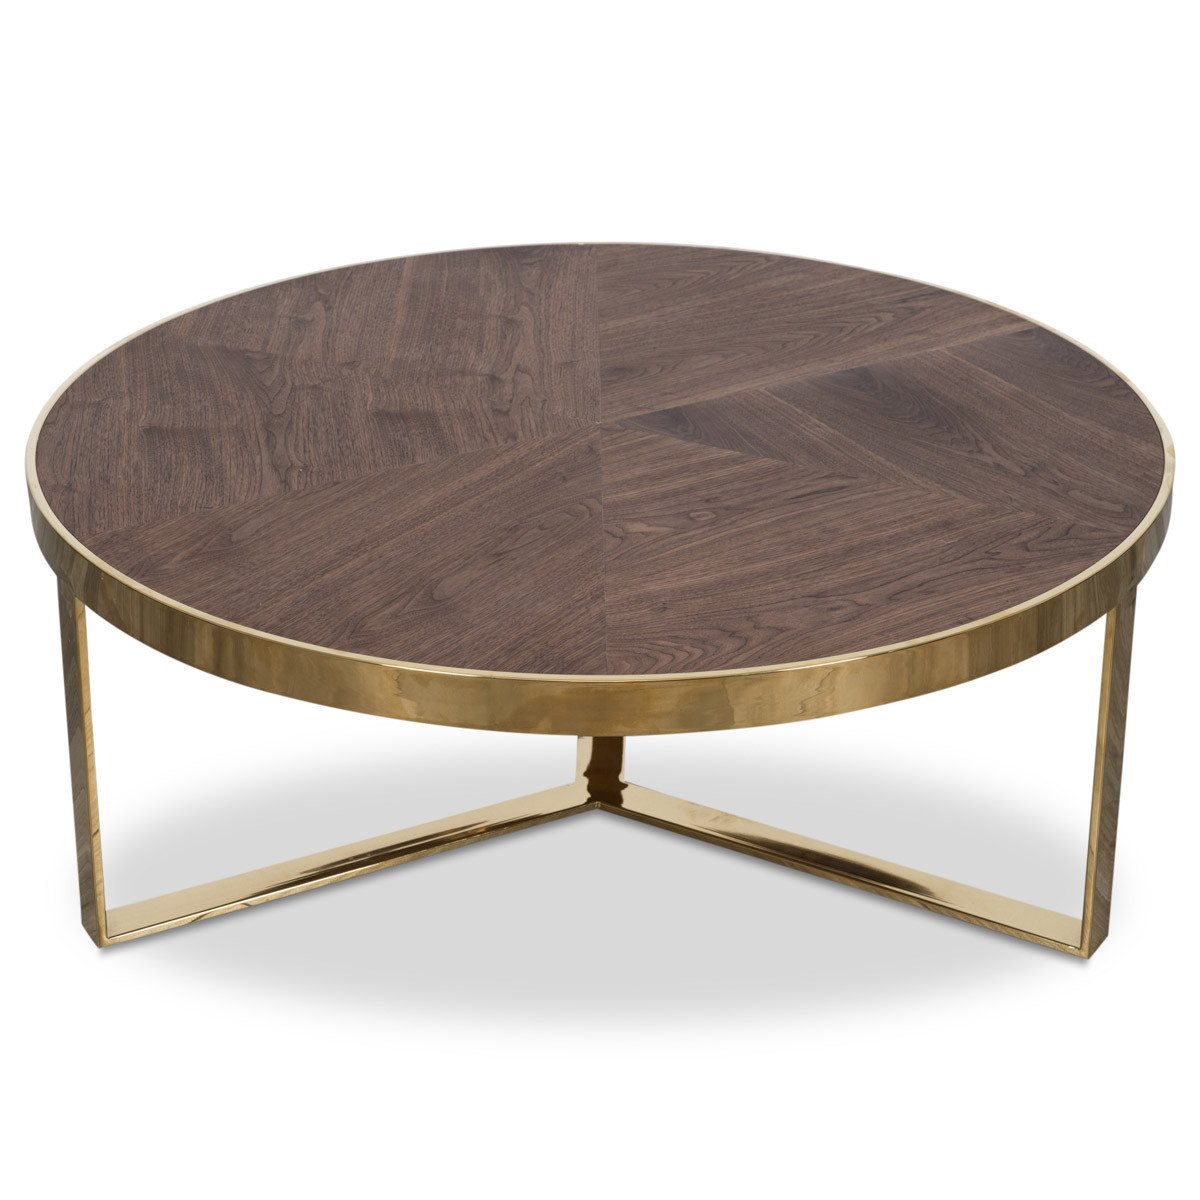 the perfect real round brass end table jockboymusic upper east side coffee modern mod oiled walut top set high nightstands large accent farmhouse with pipe legs diy medium wood